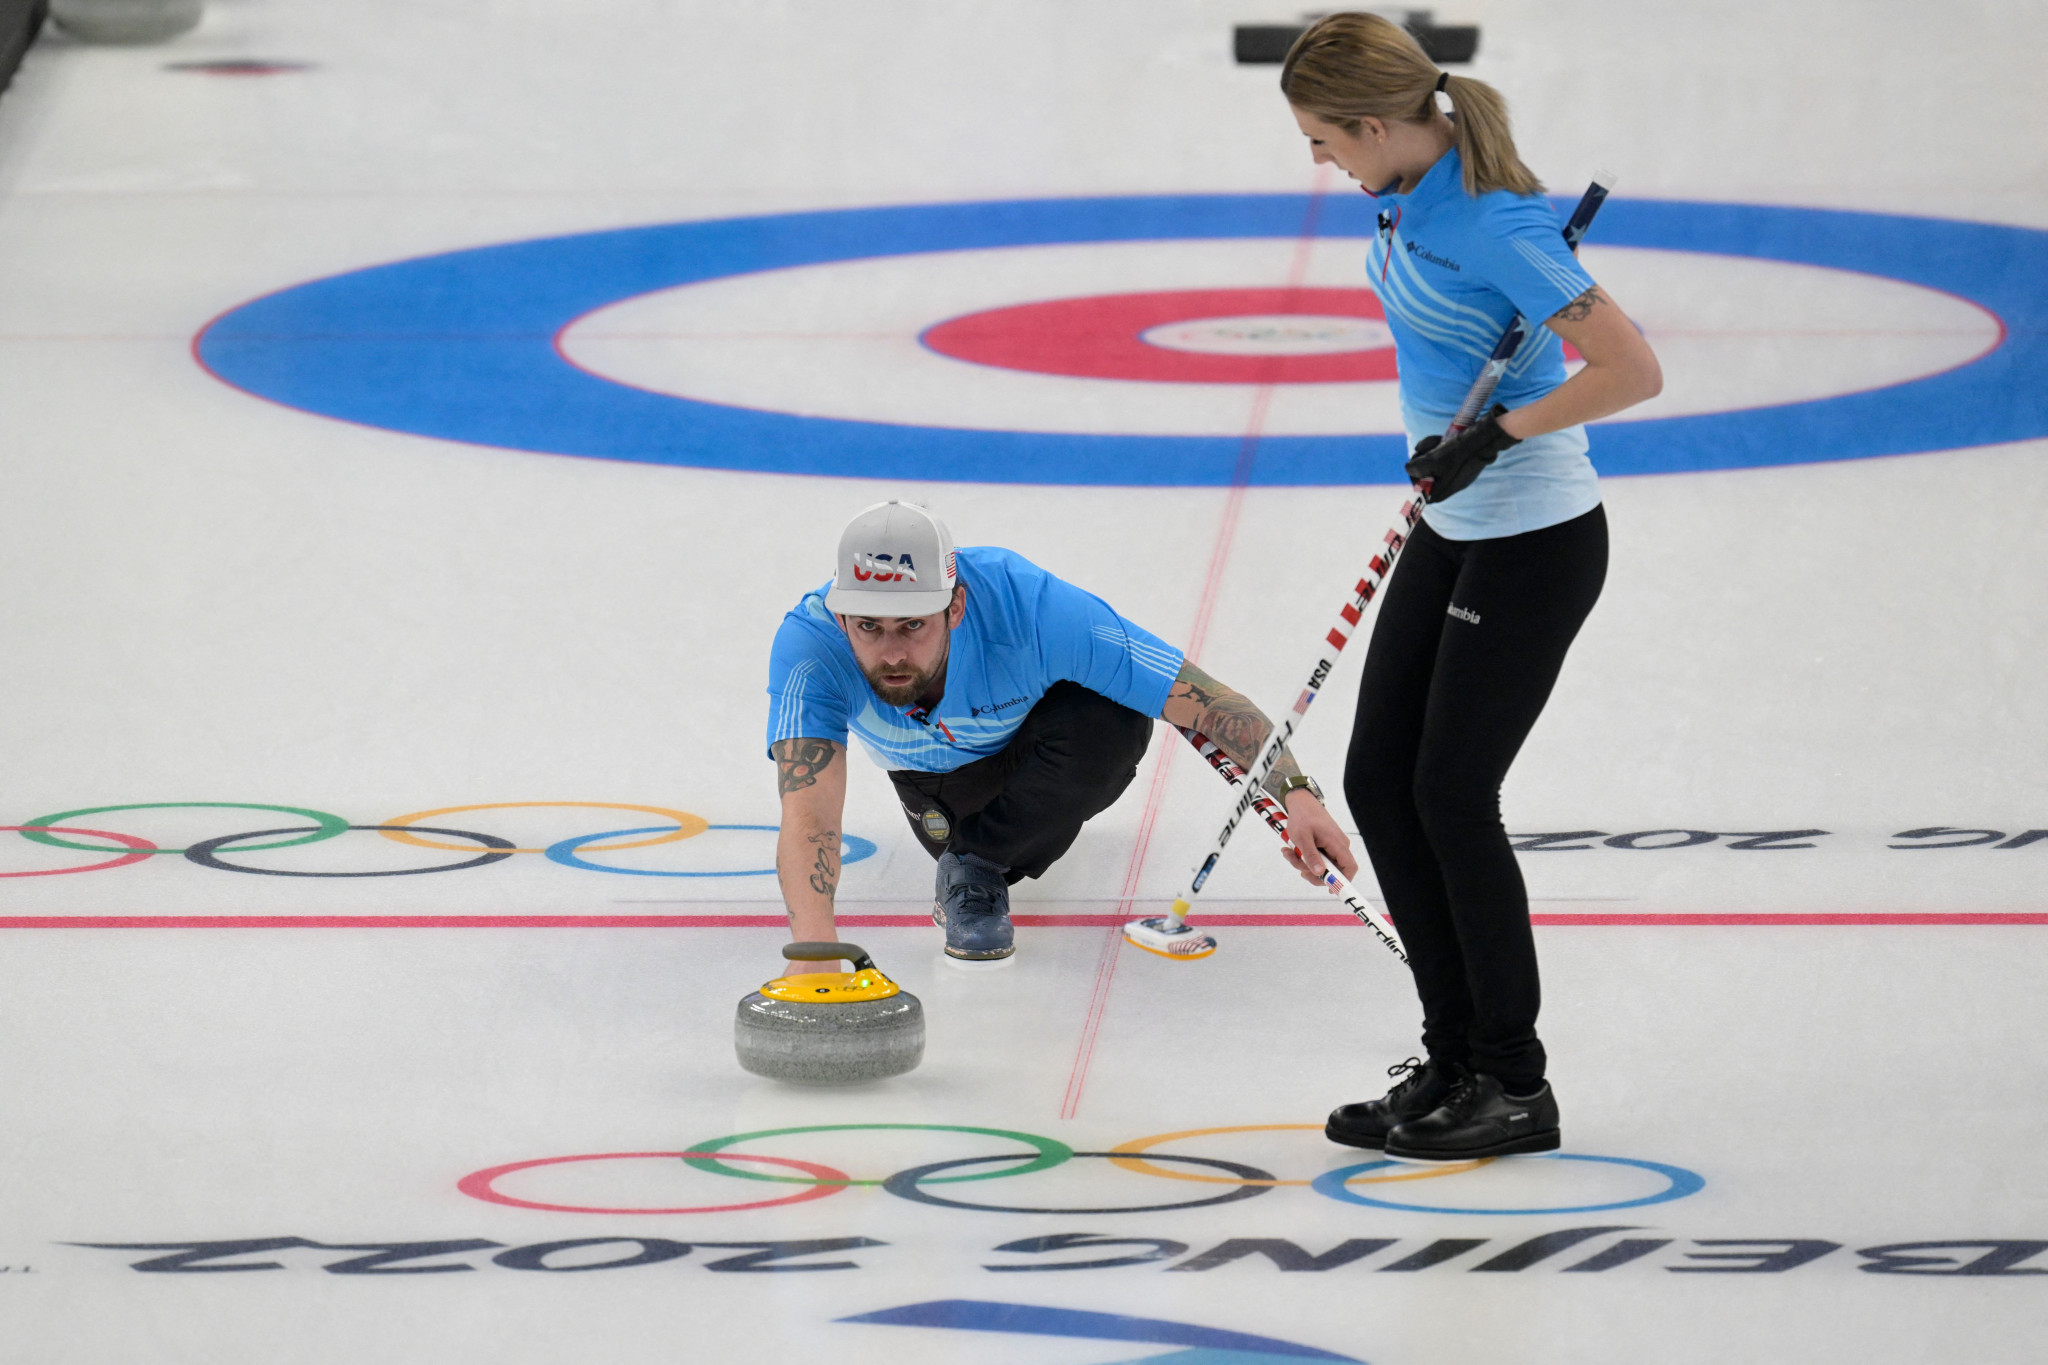 US claim first win of Beijing 2022 Winter Olympics in mixed doubles curling